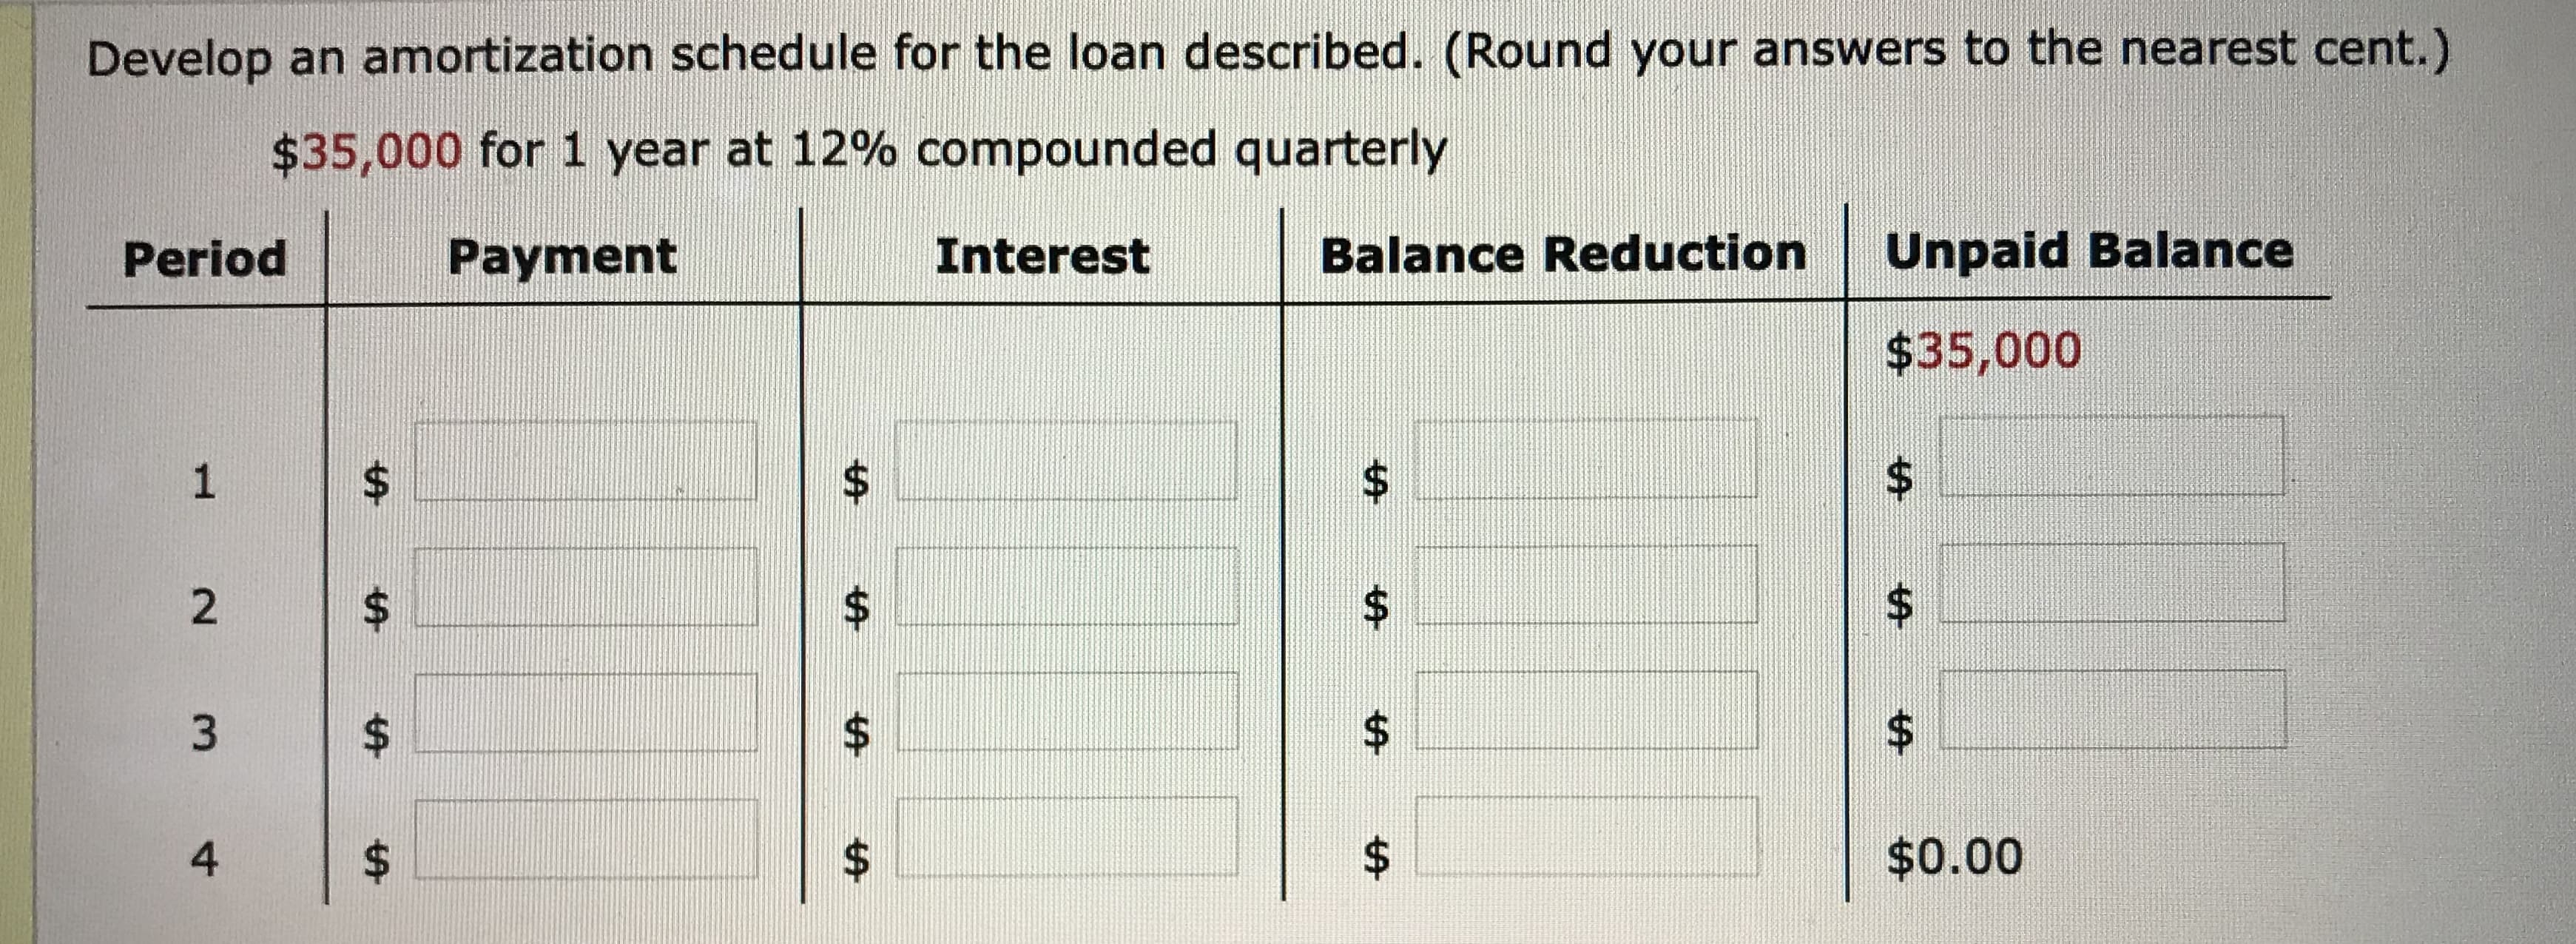 Develop an amortization schedule for the loan described. (Round your answers to the nearest cent.)
$35,000 for 1 year at 12% compounded quarterly
Period
Payment
Interest
Balance Reduction
Unpaid Balance
$35,000
%24
24
24
$0.00
%24
%24
%24
%24
%24
%24
%24
%24
%24
%24
%24
%24
%24
2.
3.
4-
